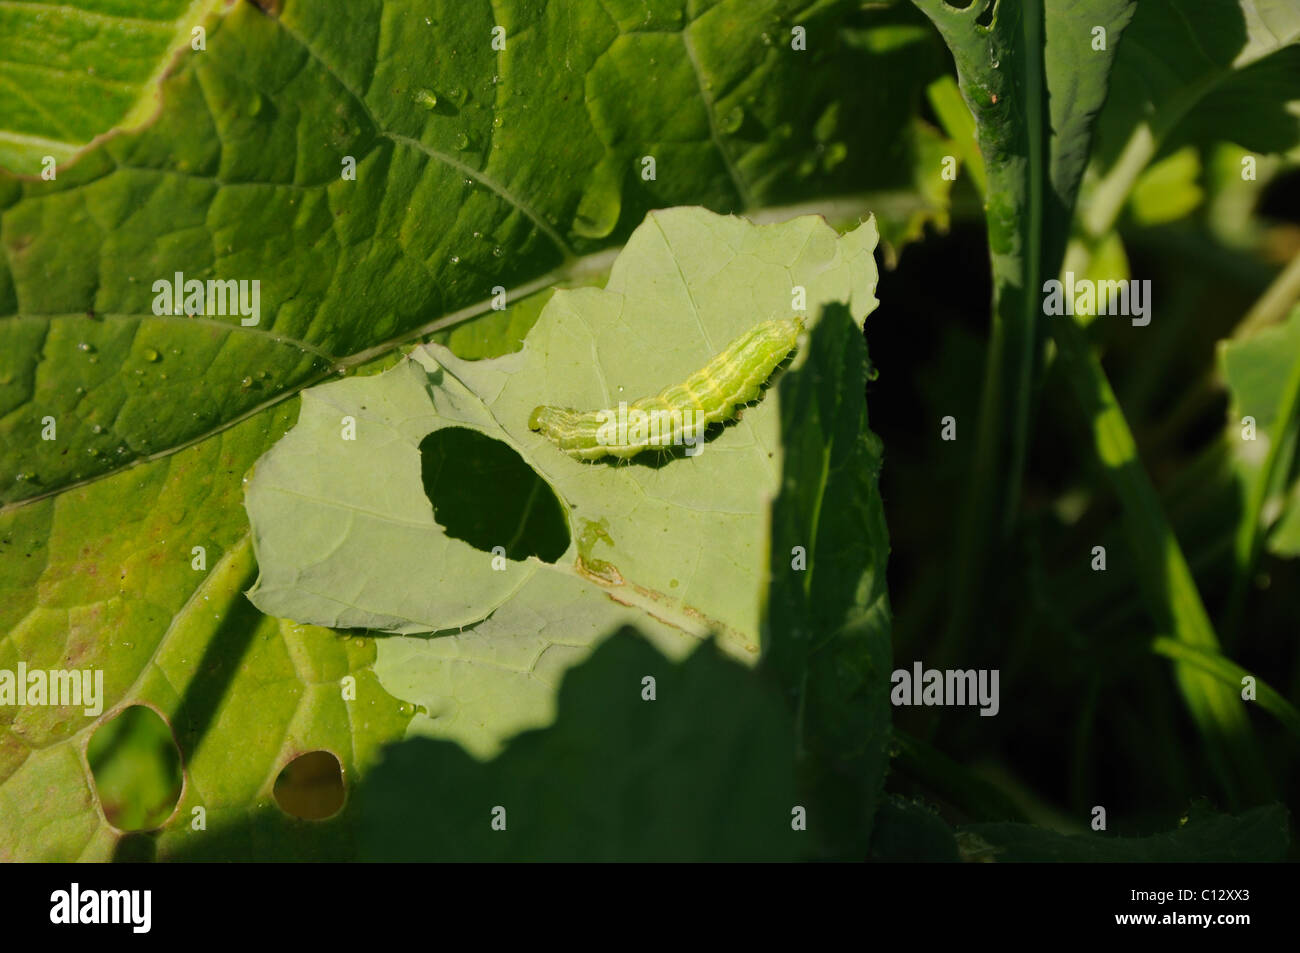 Kale crop being eaten by pests Stock Photo